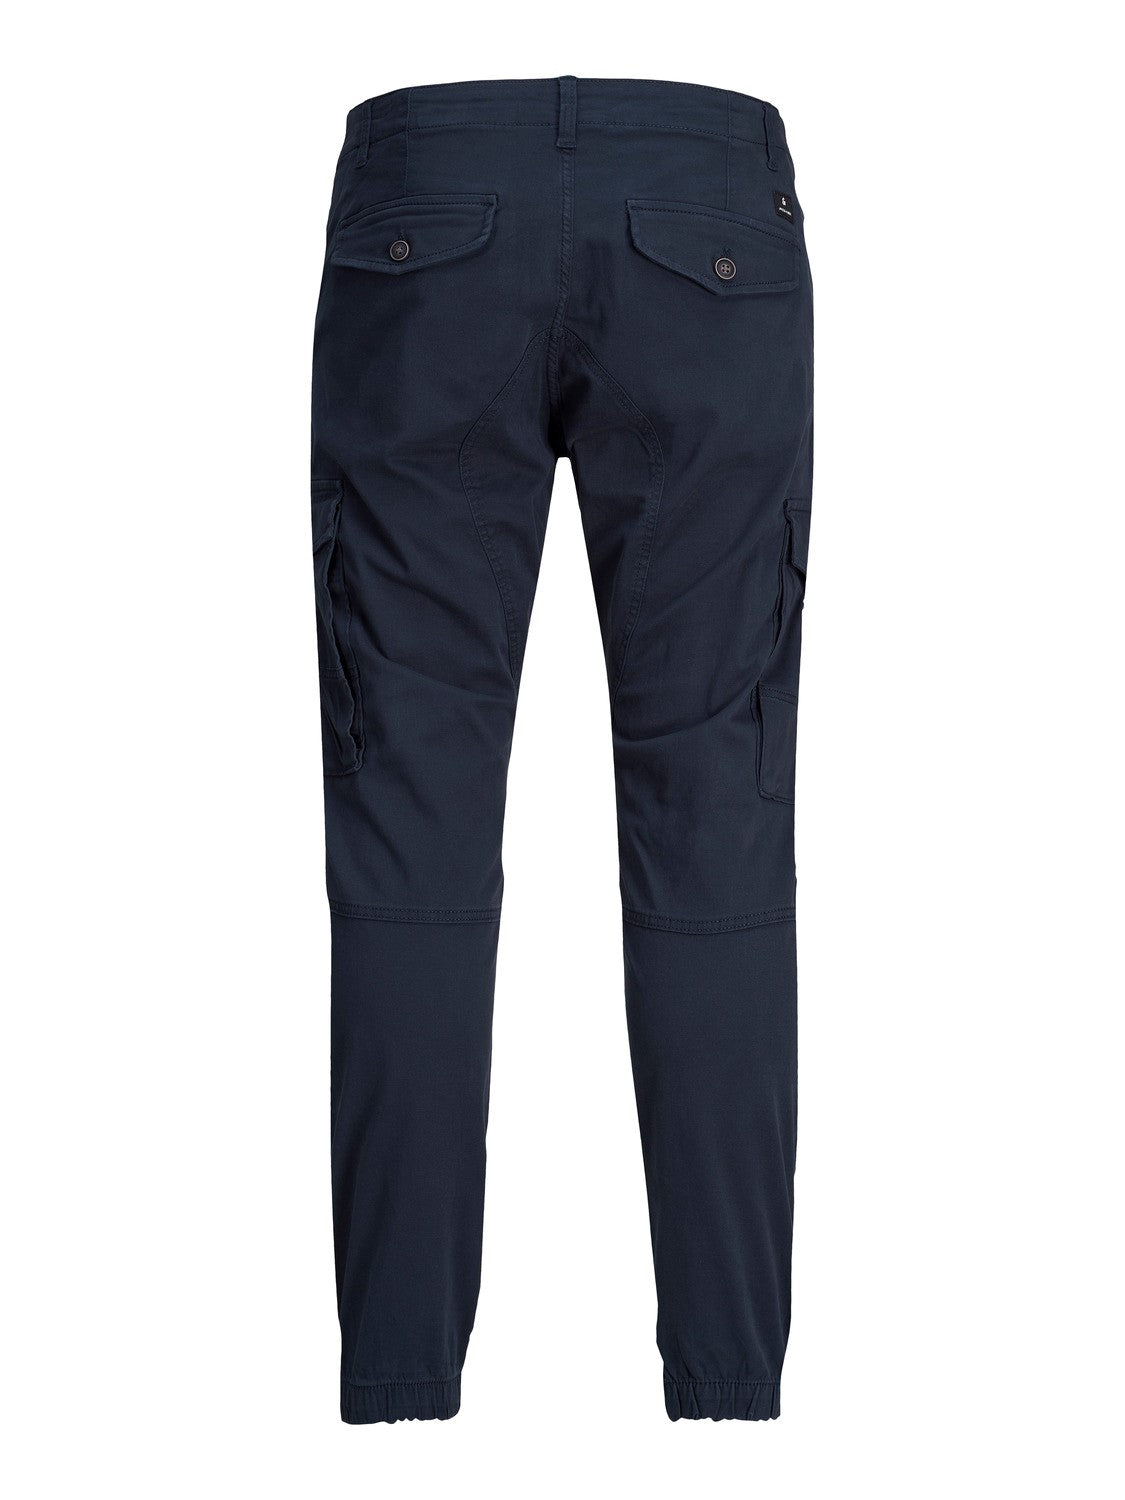 Paul Flake Navy Cargo Pant-Back view